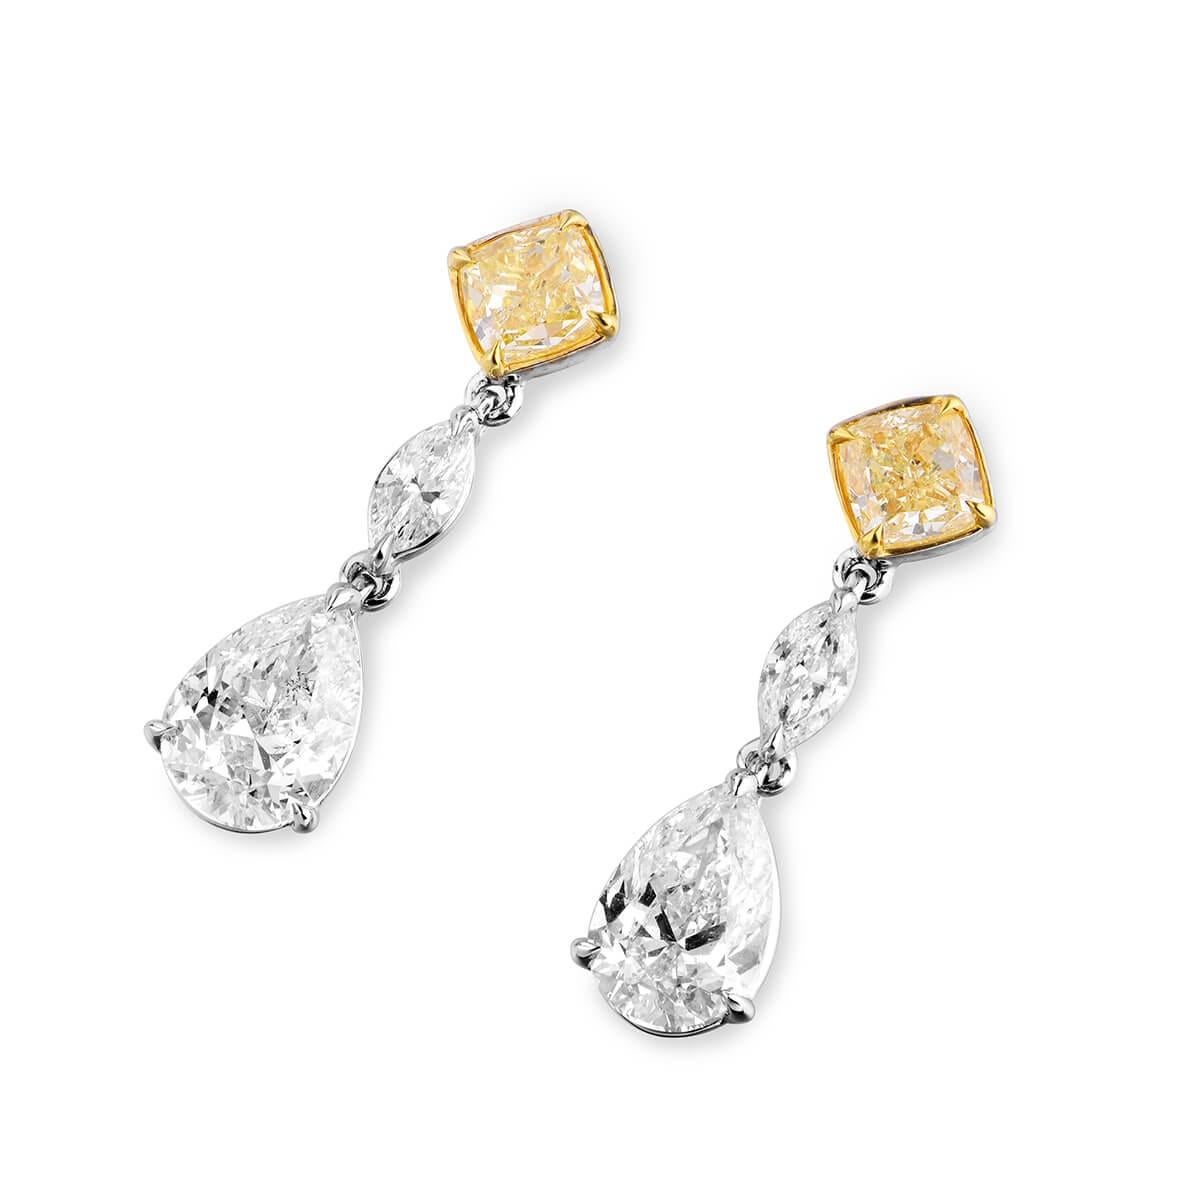 WHITE GOLD DIAMOND EARRINGS - 3.16 CT


Set in 18K White gold


Total centre diamond weight: 2.01 ct - [ 1.00 ct and 1.01 ct ]
[ 2 diamonds ]
Color: I and K
Clarity: I1 and VS2

Total small marquise cut diamond weight: 0.22 ct
[ 2 diamonds ]
Color: